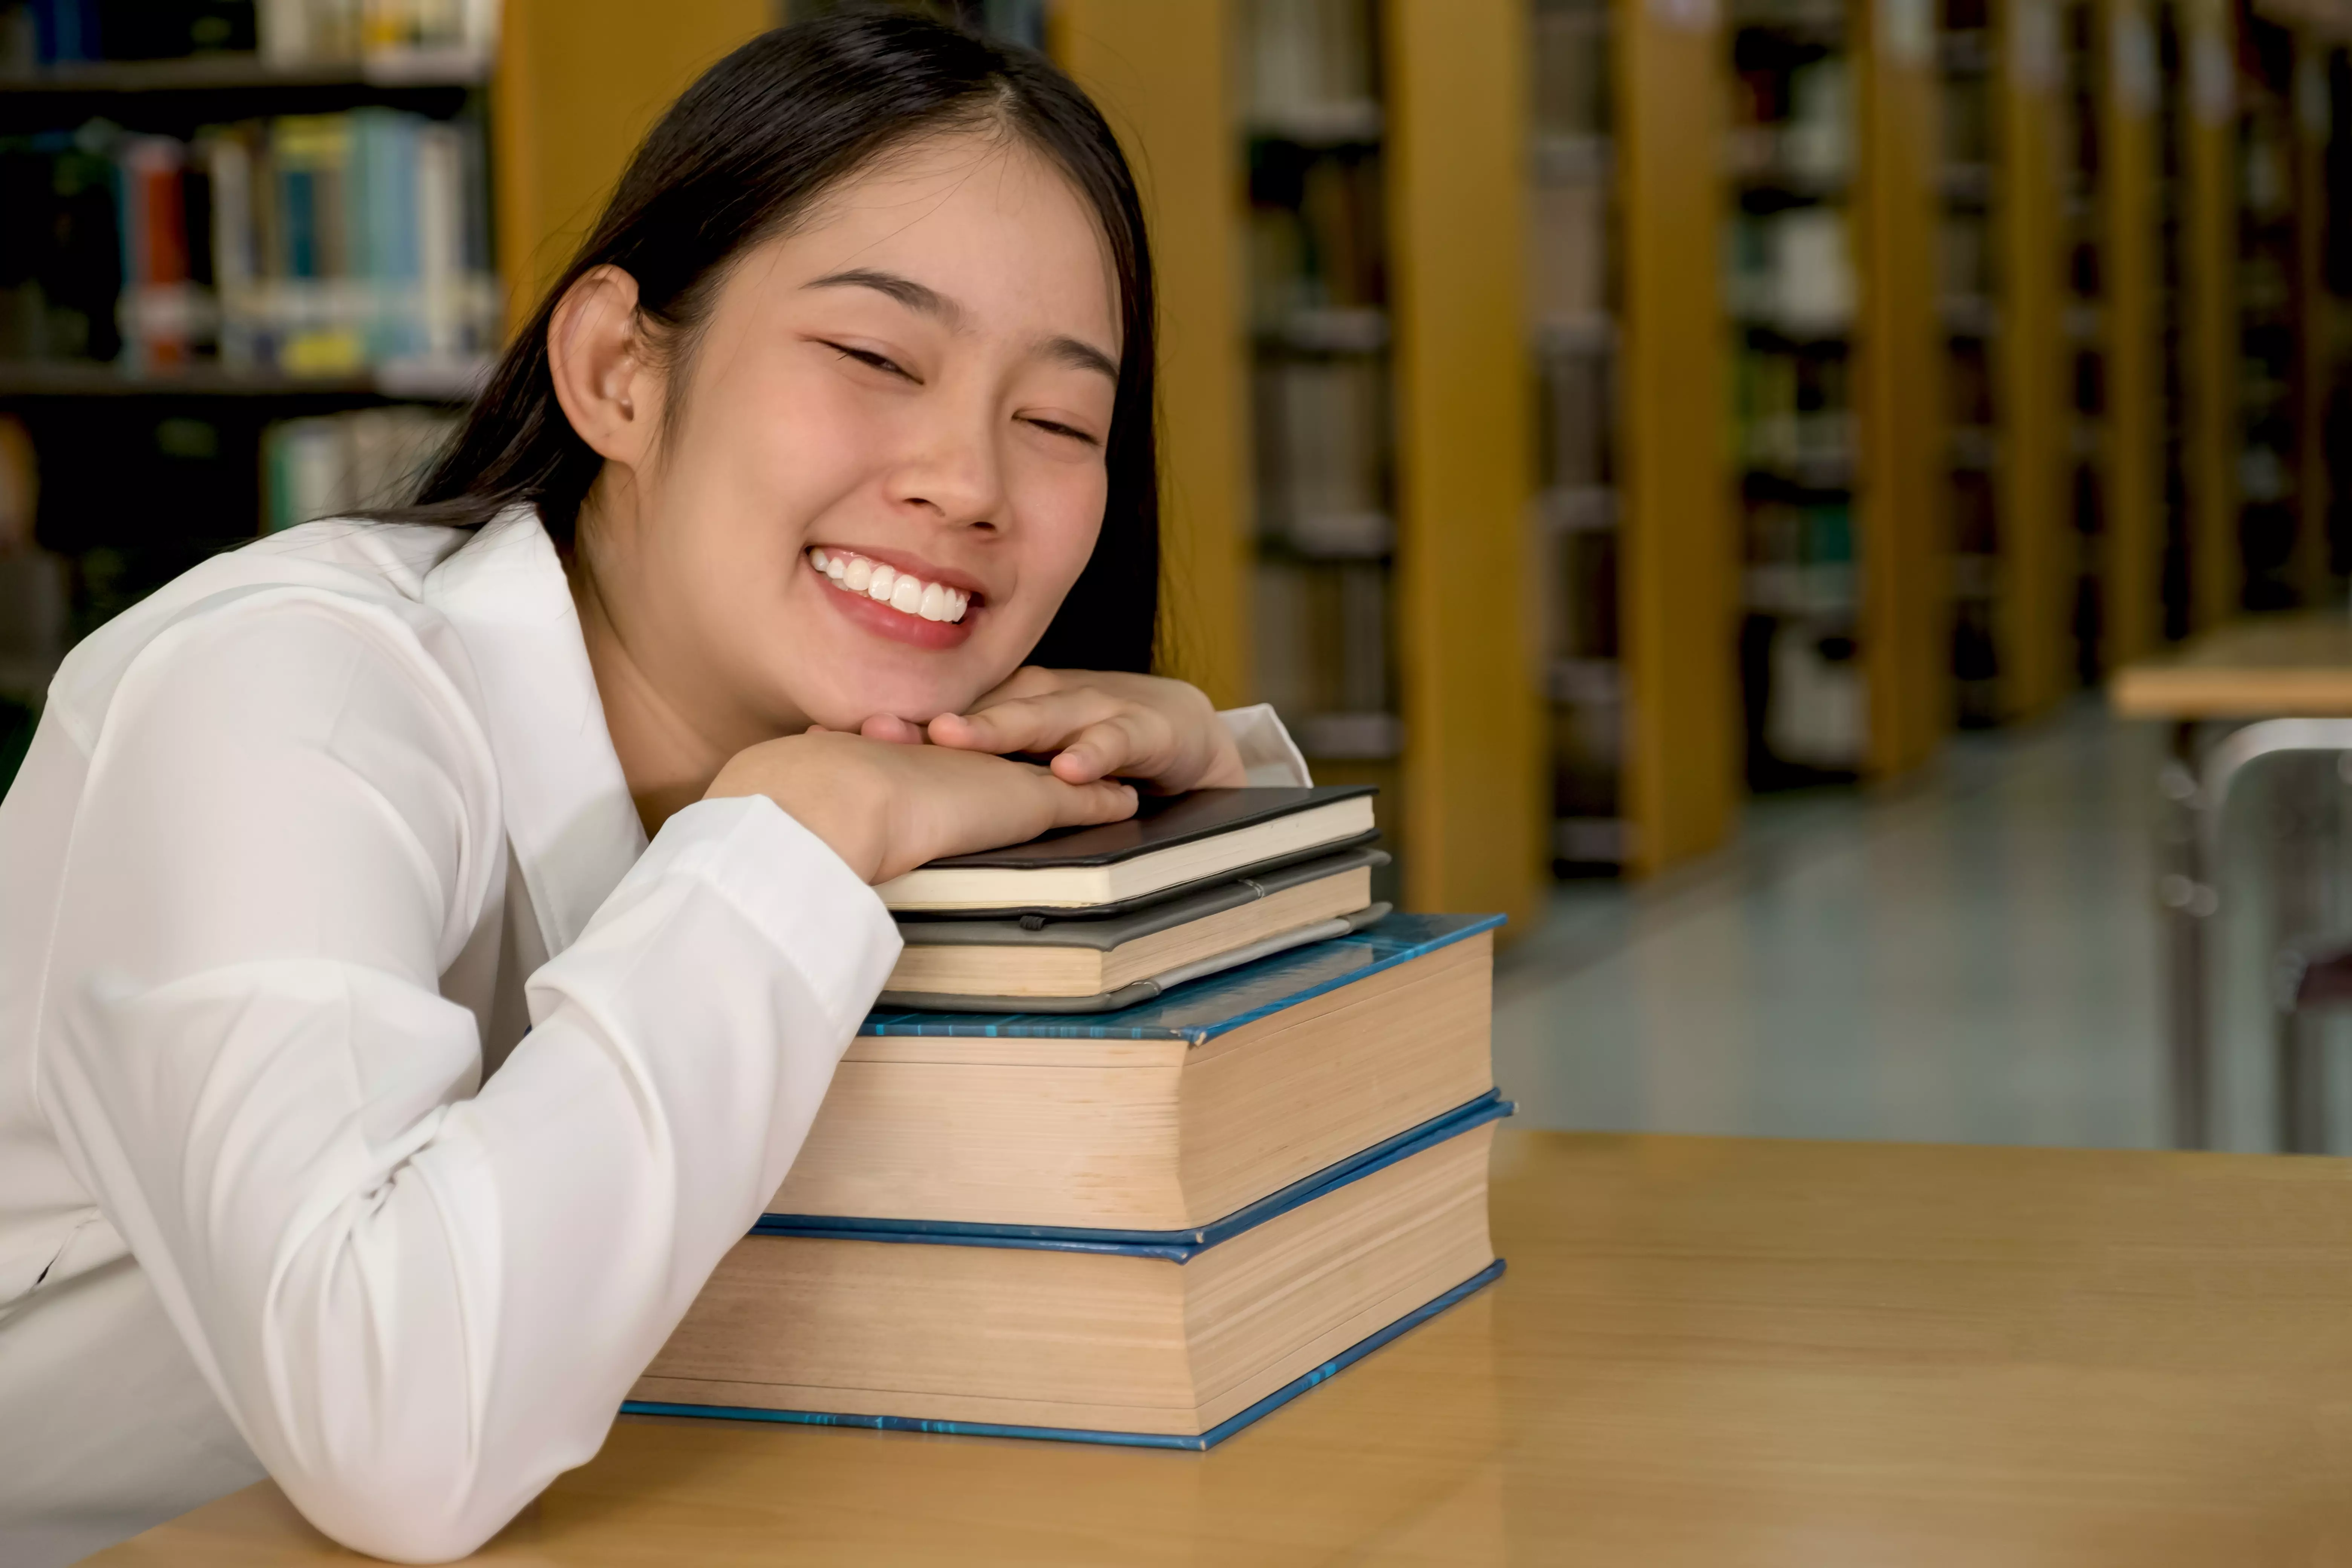 Infographic of an Asian female college student lying on a set of books.